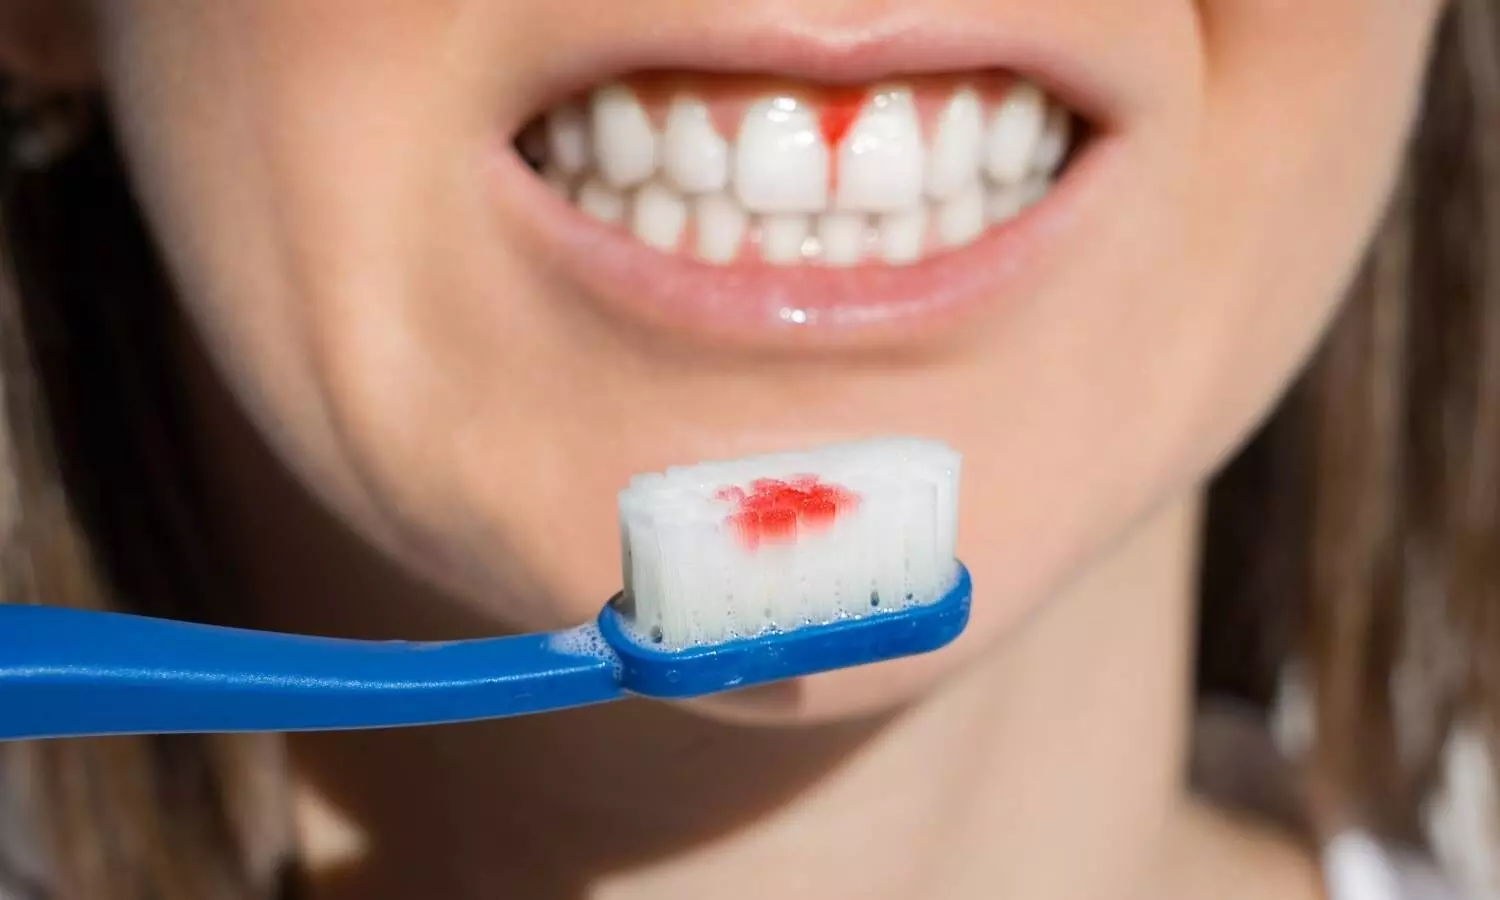 New device may make accurate assessment of both presence and extent of gum disease